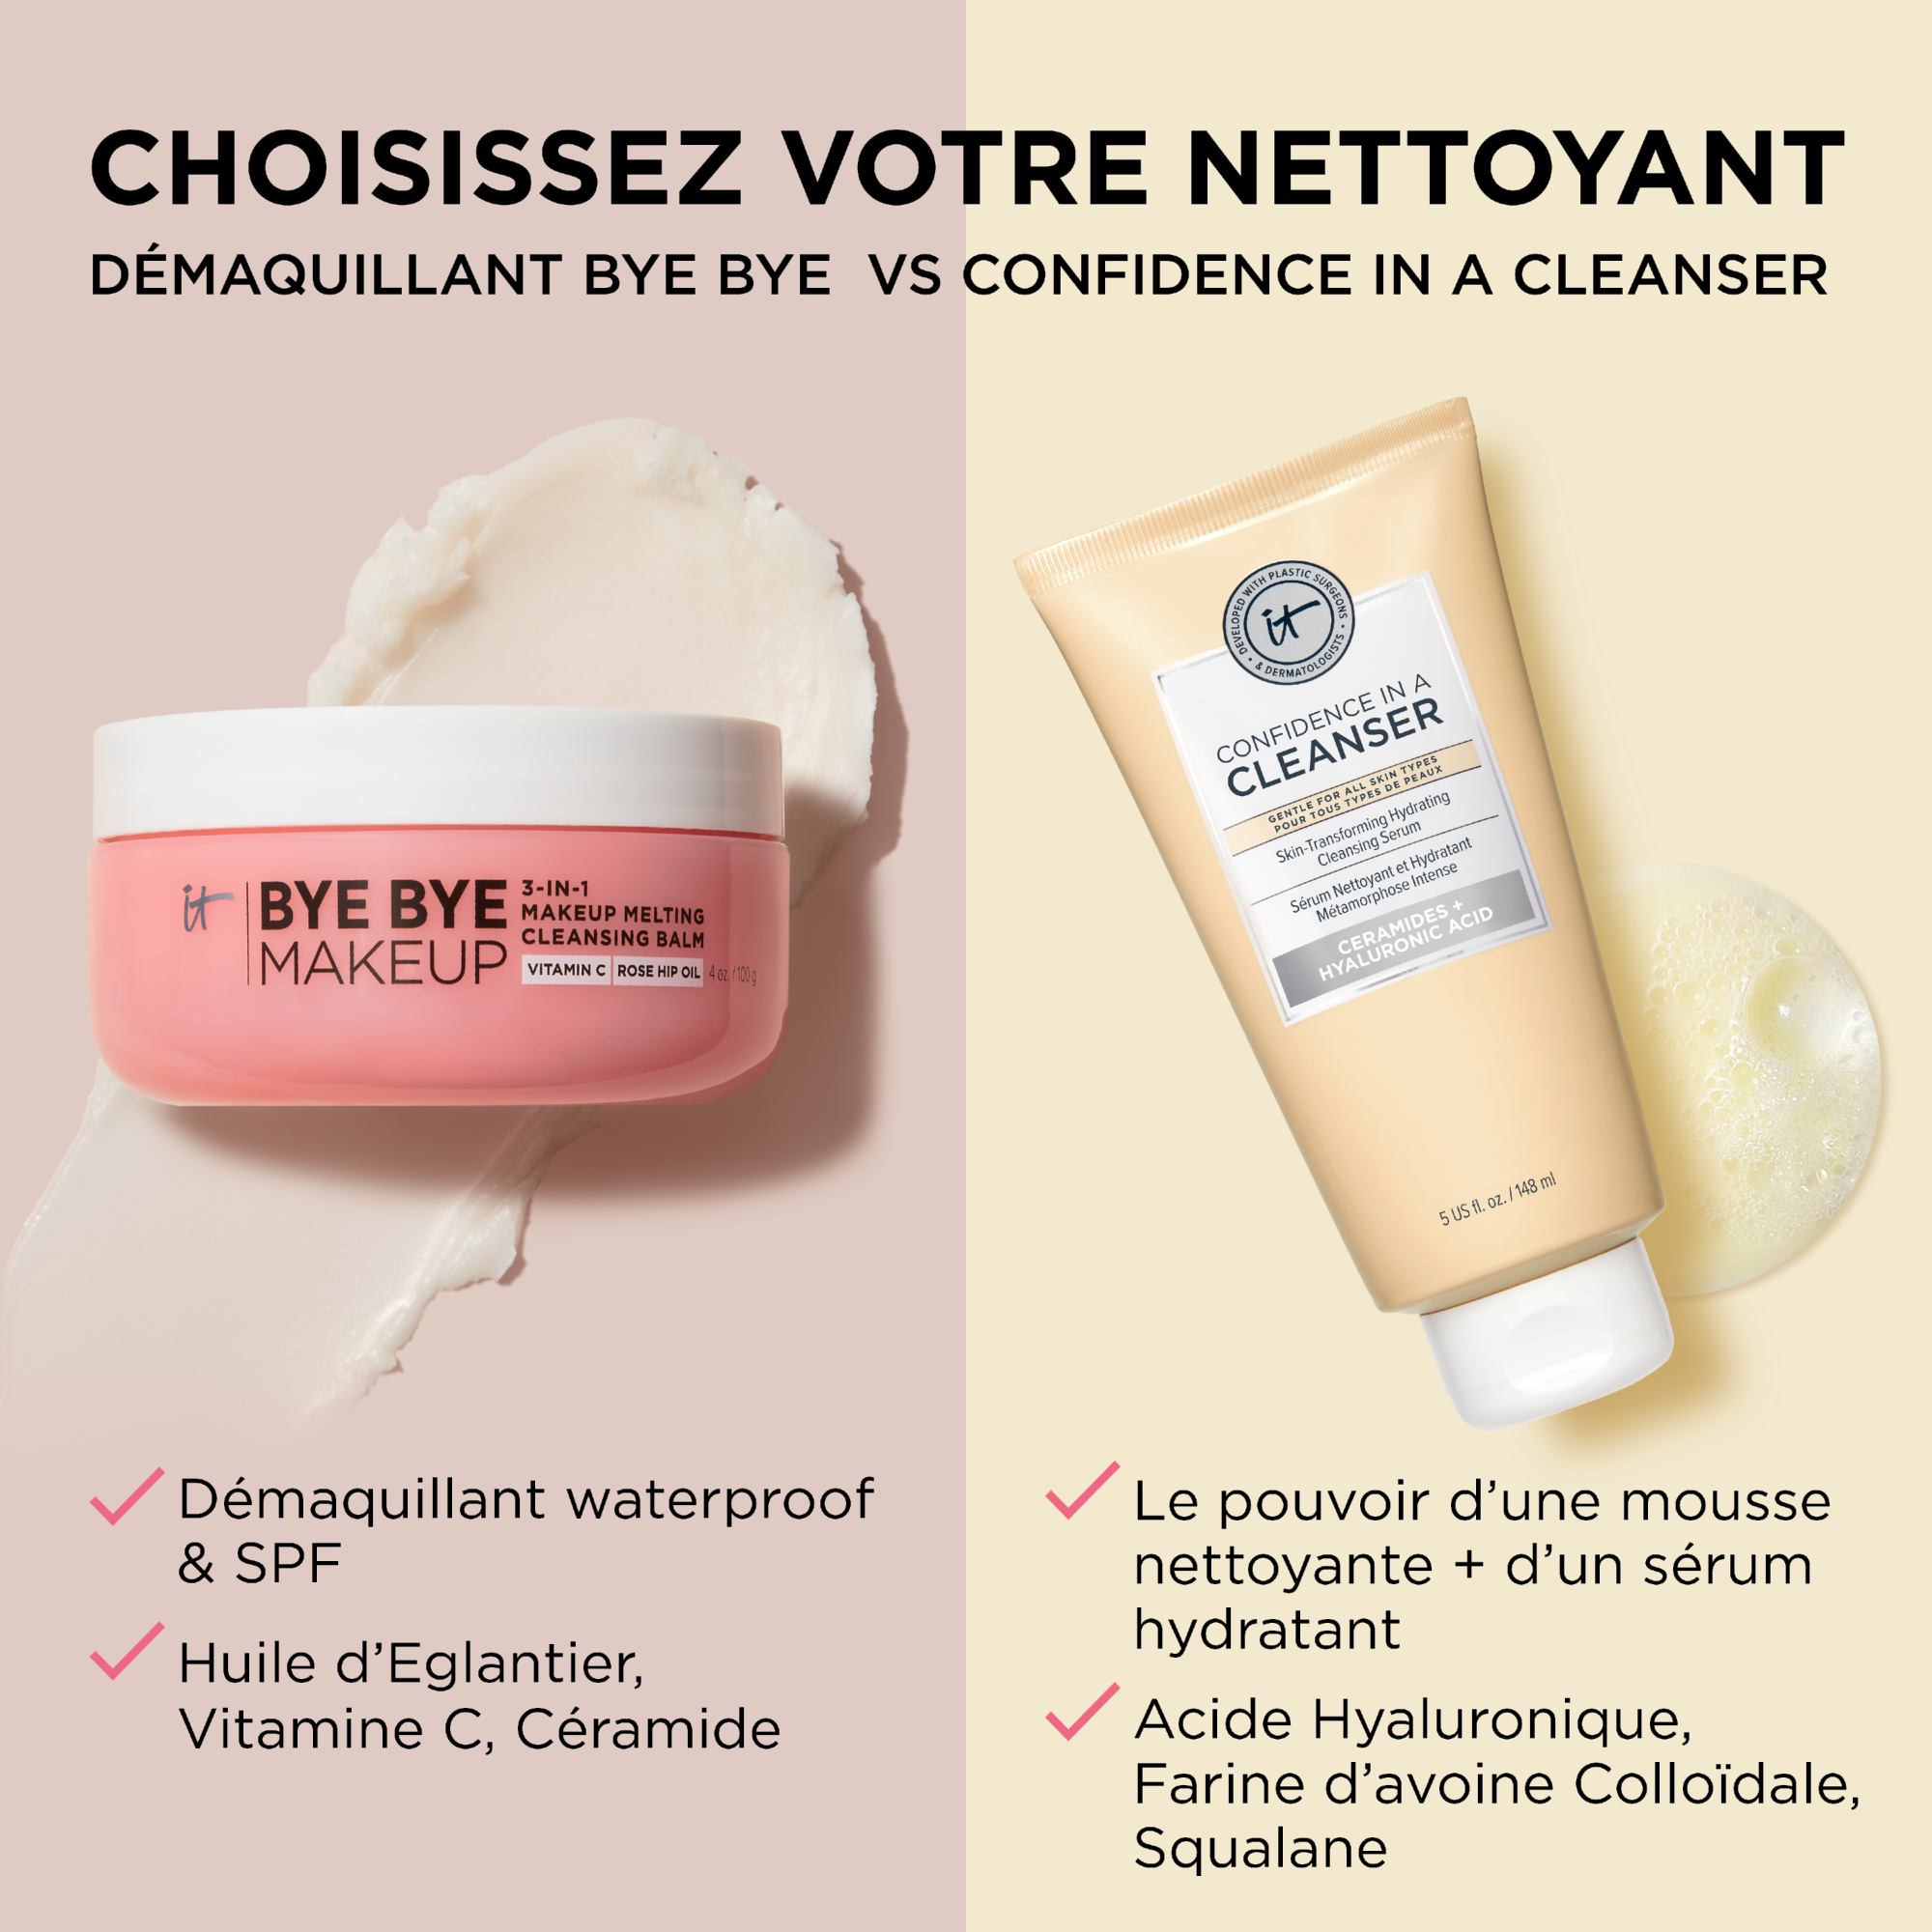 Bye Bye Makeup Baume Démaquillant